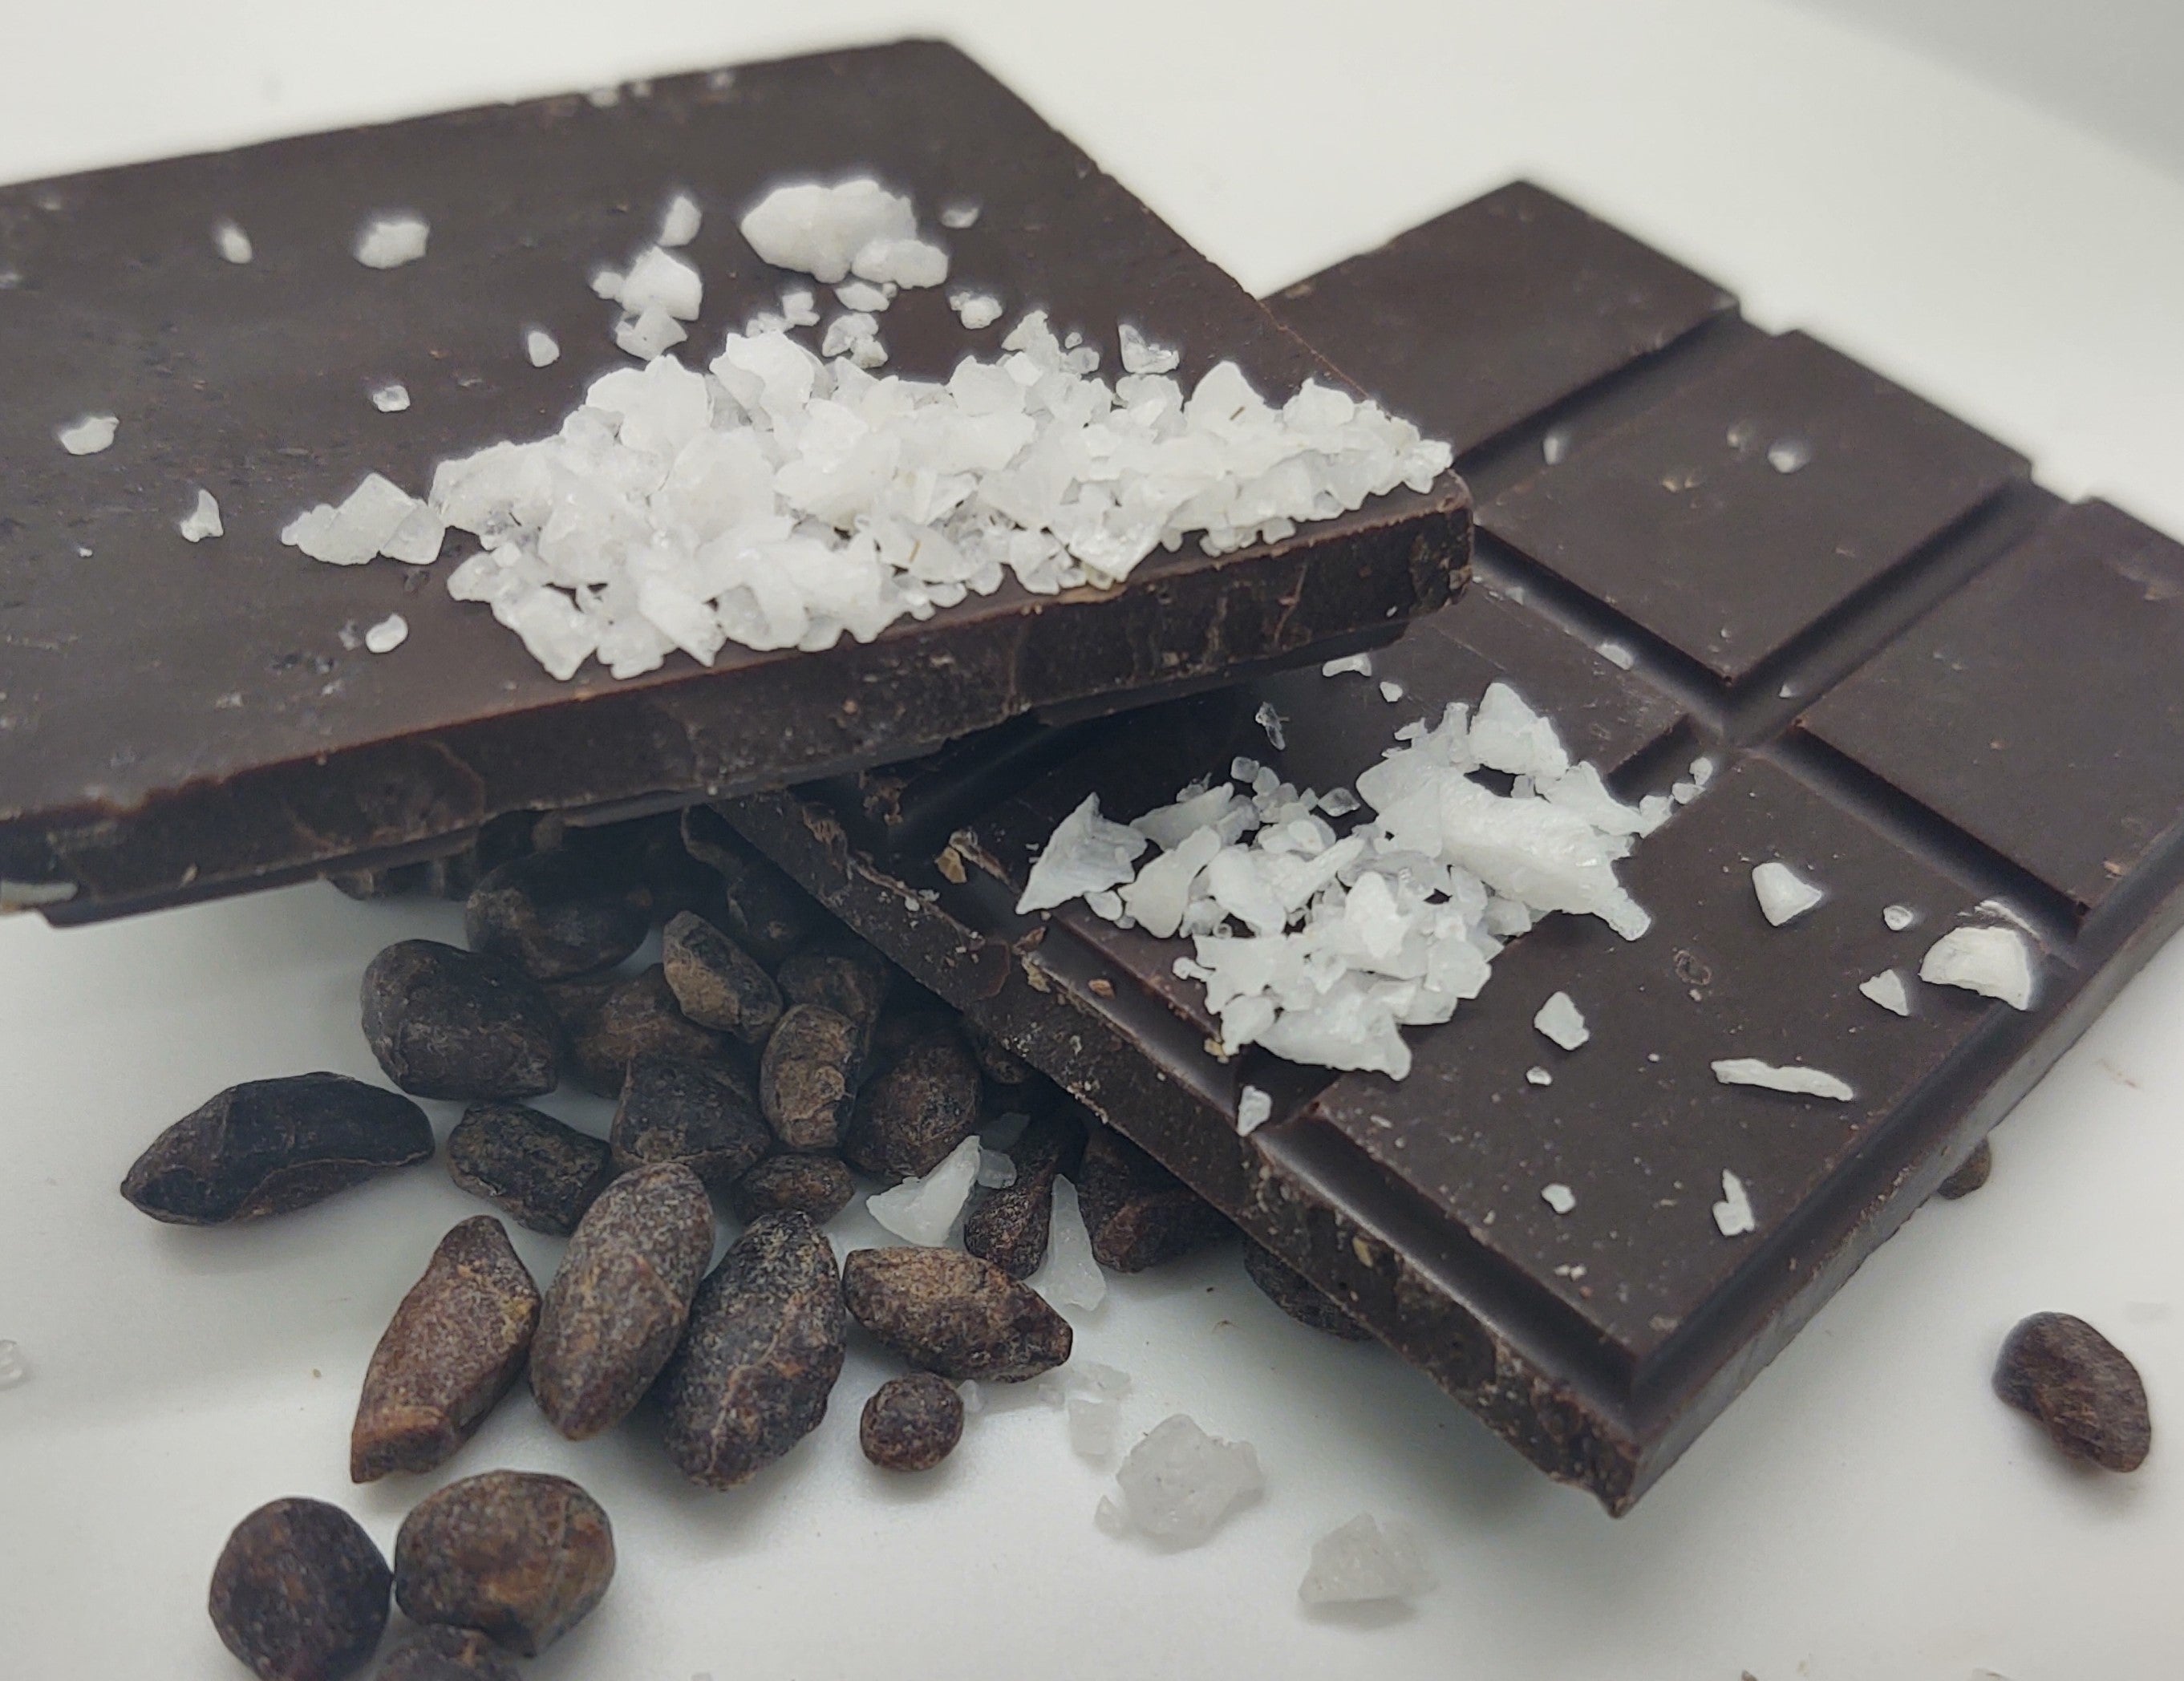 Pictured: Solid dark chocolate bar mounted by raw sea salt and cocoa nibs